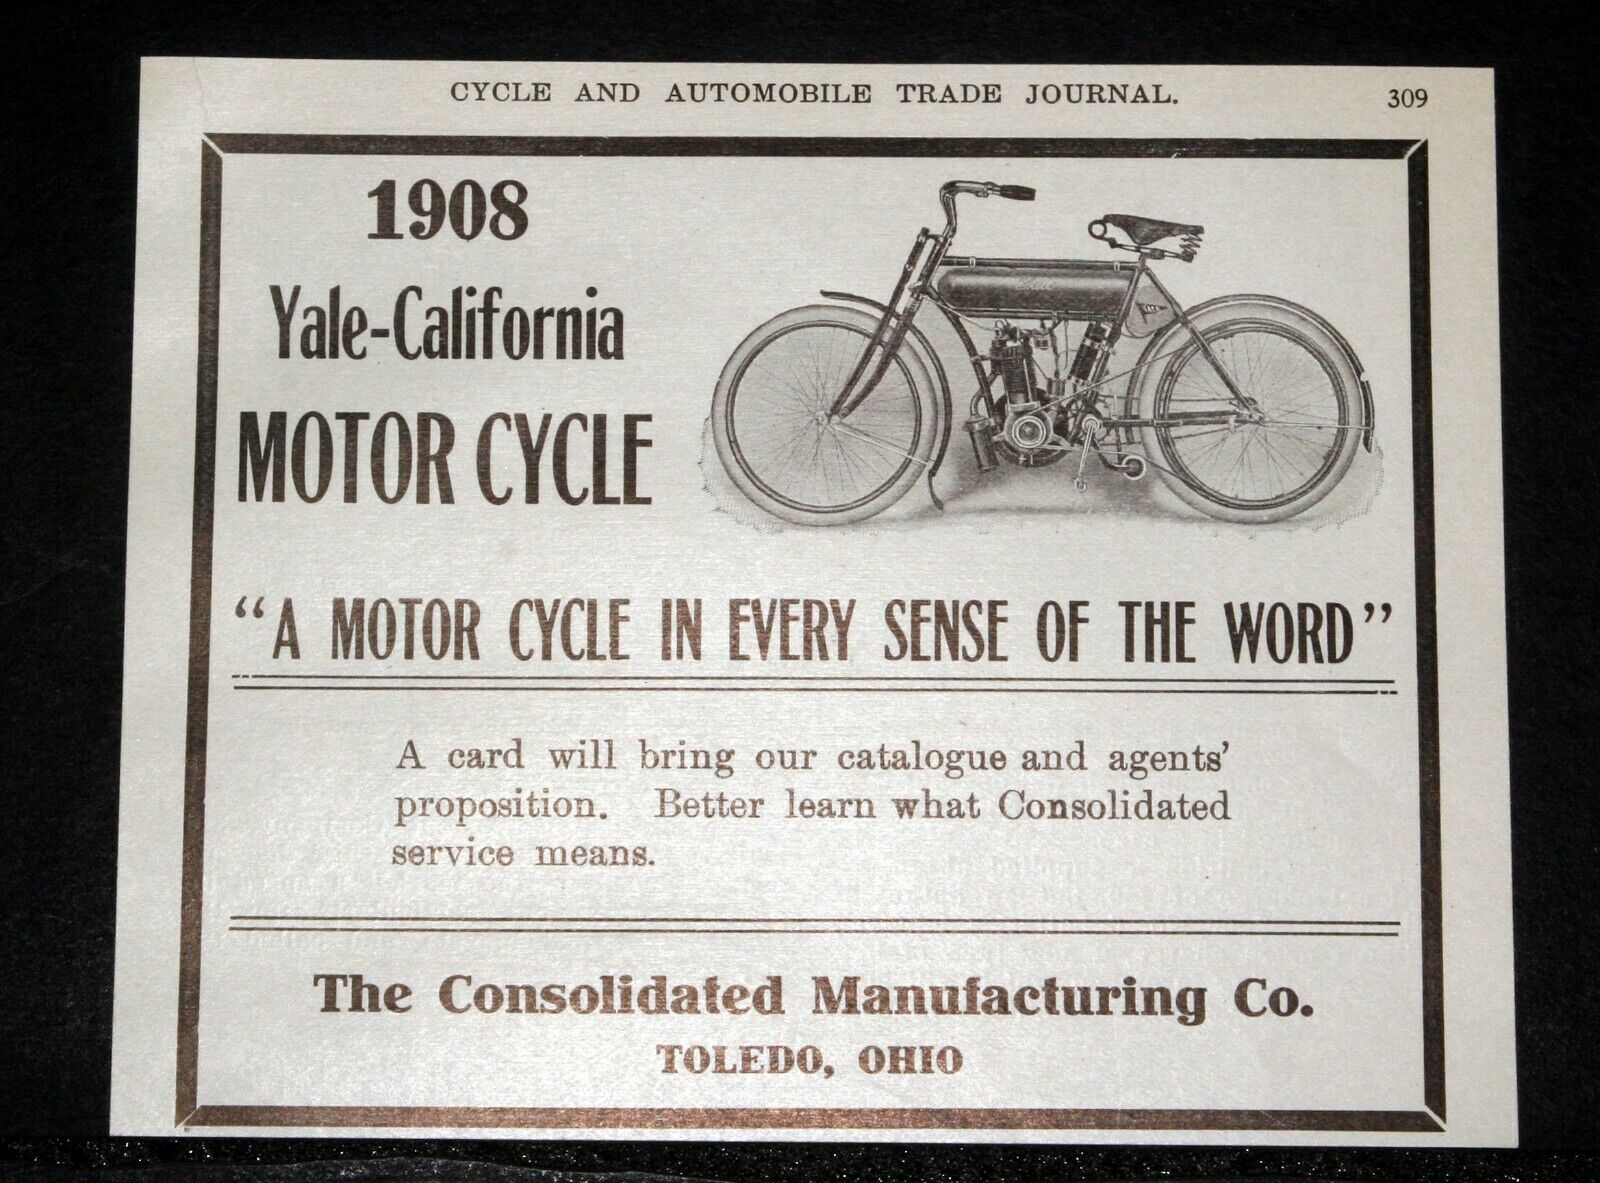 1907 OLD MAGAZINE PRINT AD, 1908 YALE-CALIFORNIA MOTOR CYCLE, IN EVERY SENSE